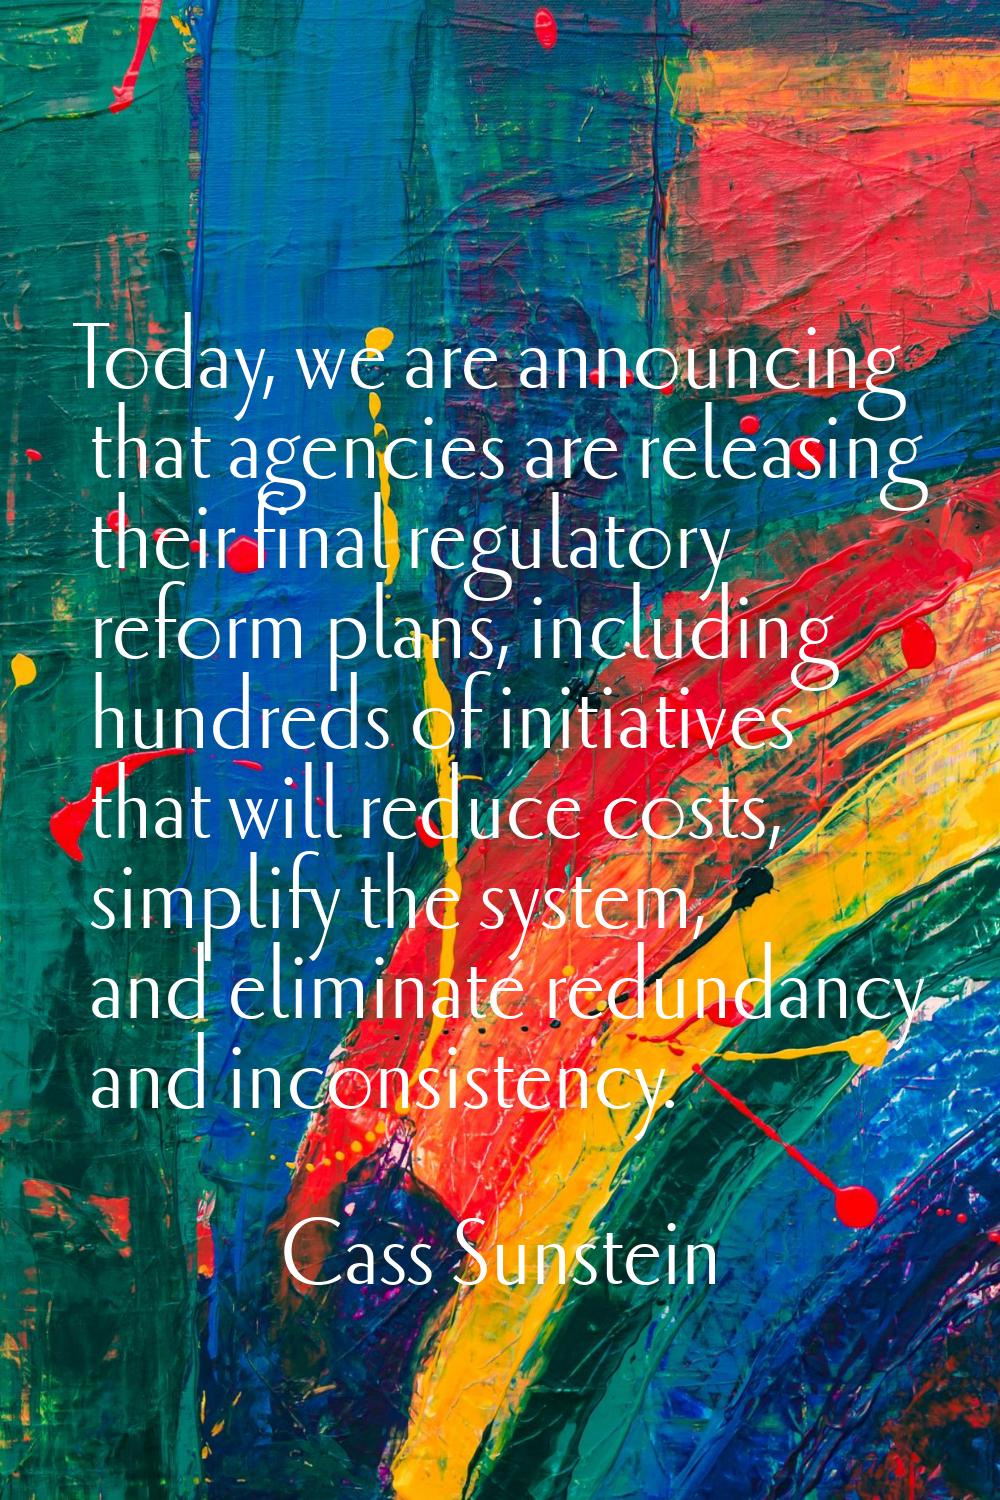 Today, we are announcing that agencies are releasing their final regulatory reform plans, including